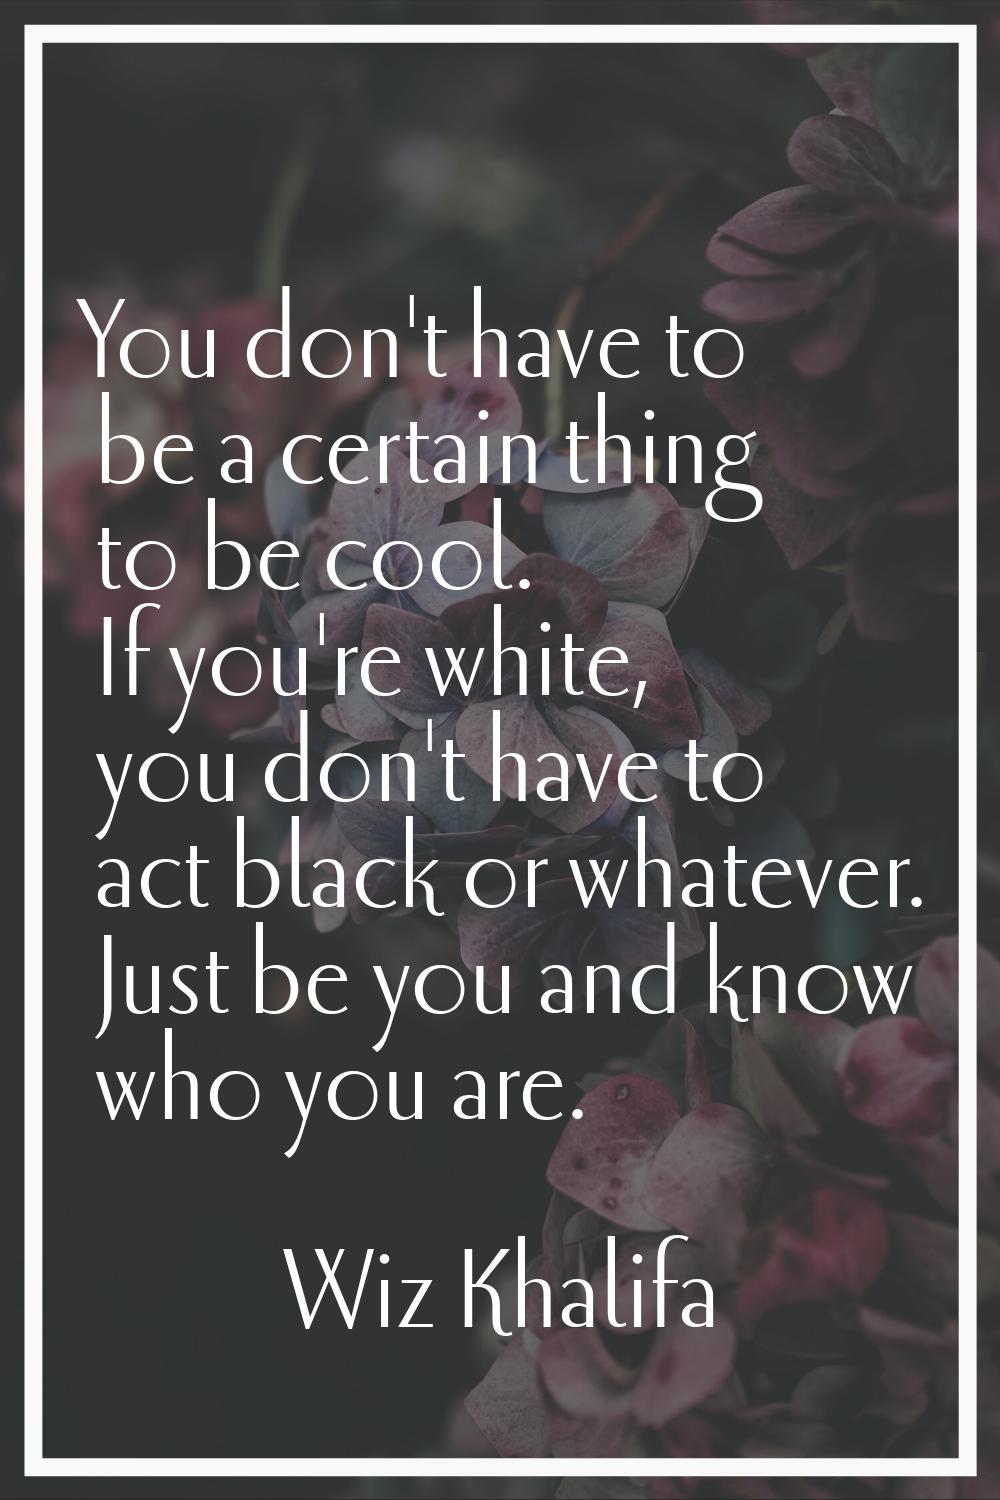 You don't have to be a certain thing to be cool. If you're white, you don't have to act black or wh